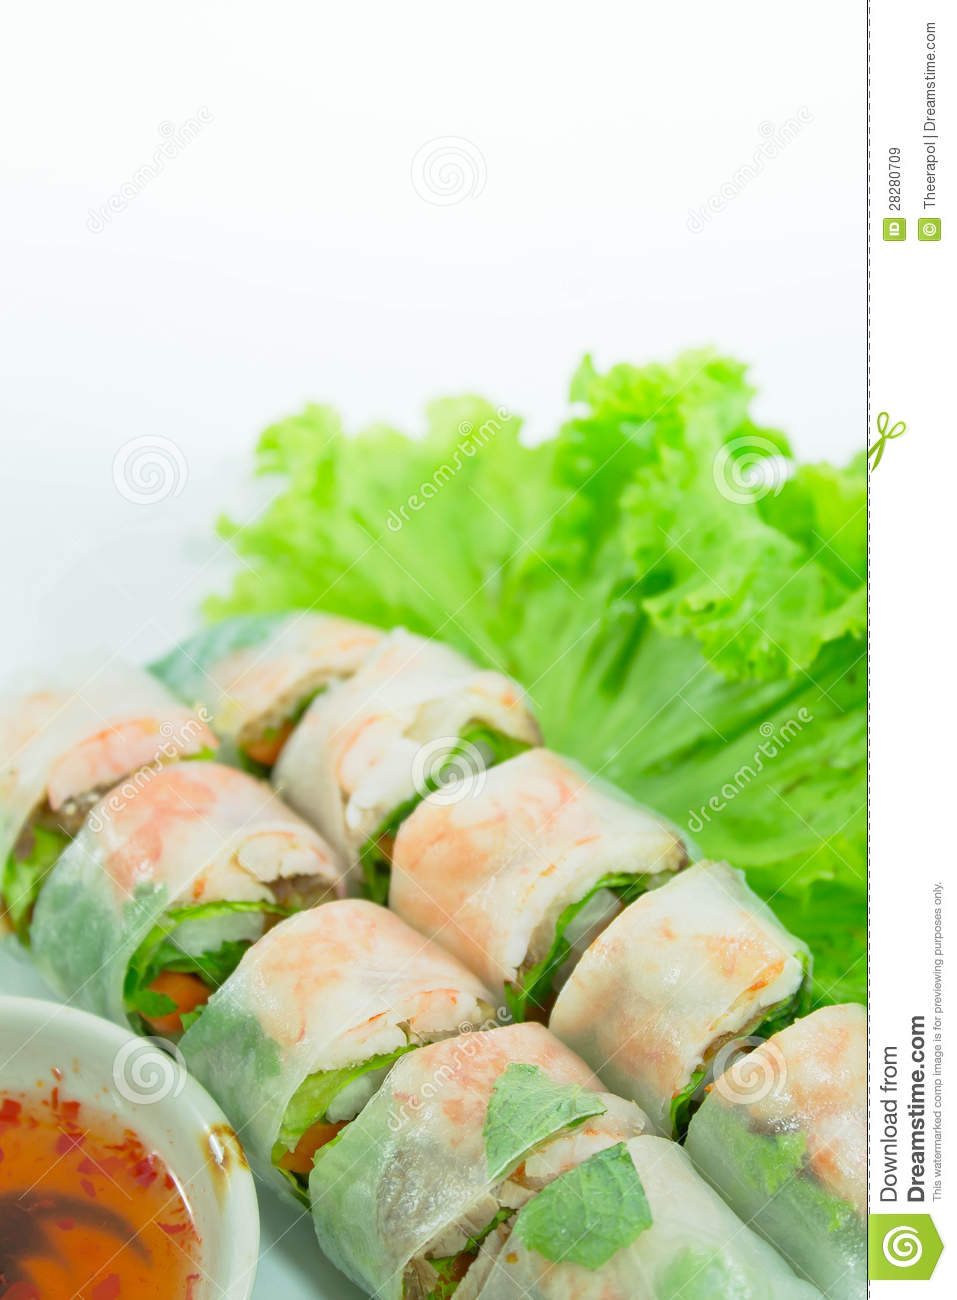 Vietnamese Food Royalty Free Stock Images   Image  28280709